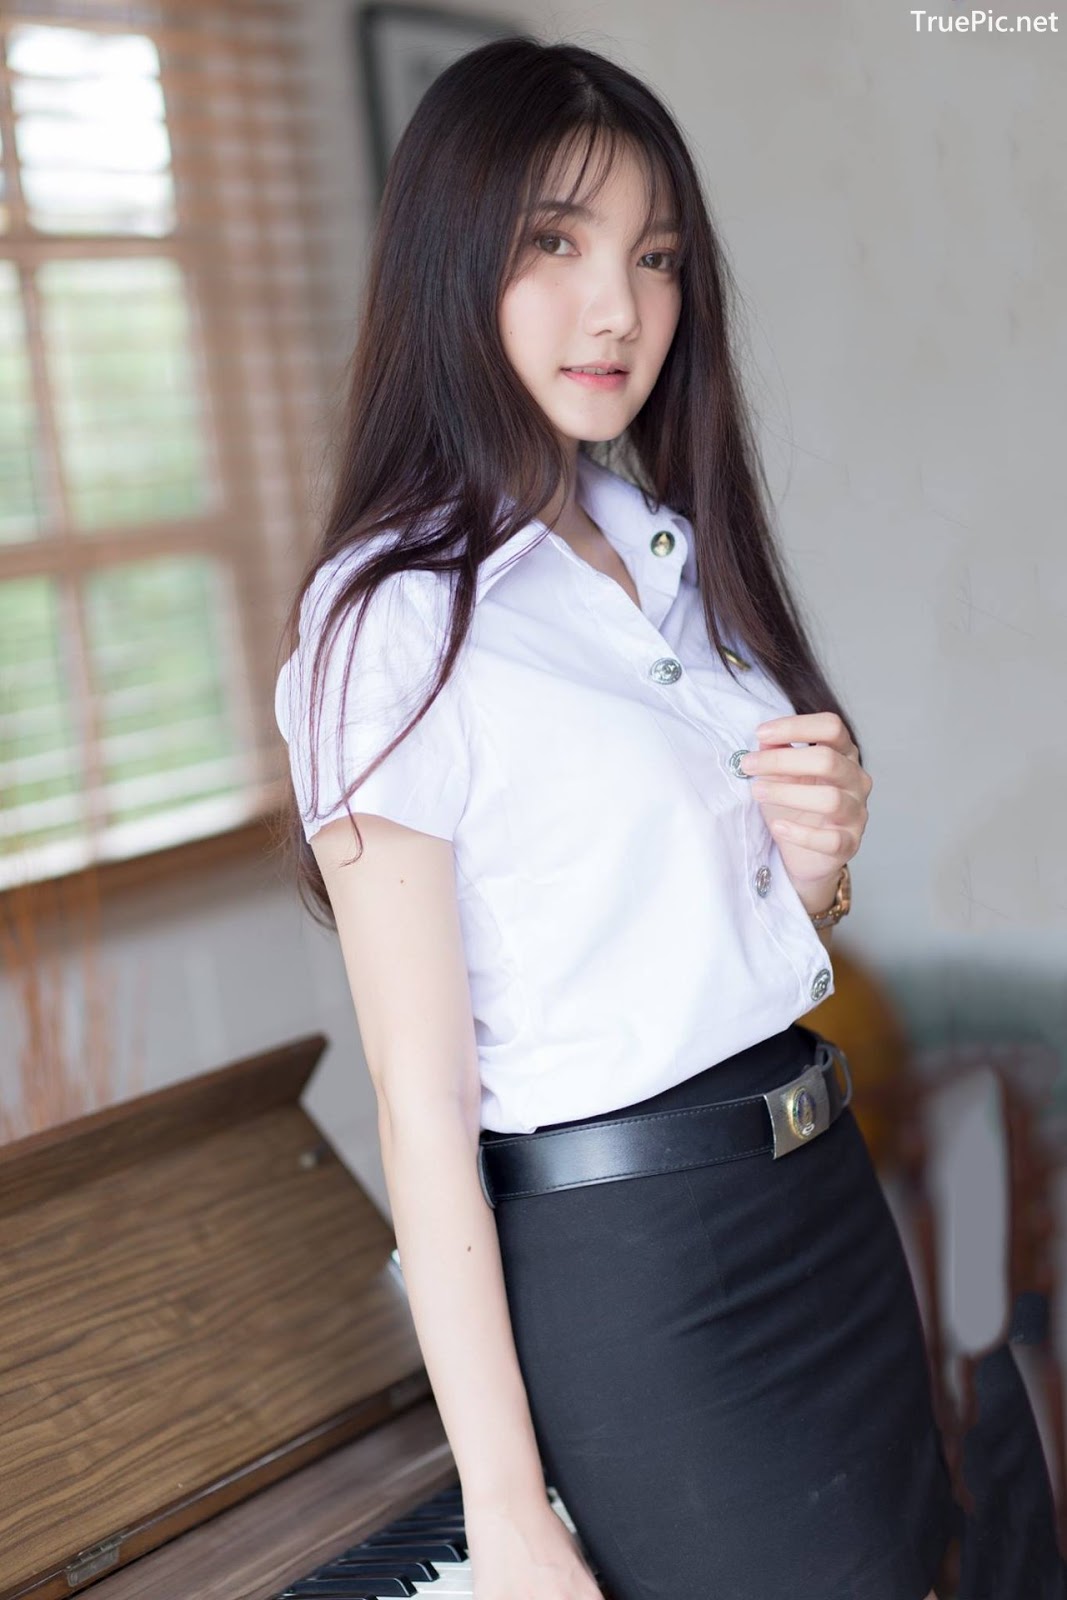 Image-Thailand-Cute-Model-Creammy-Chanama-Concept-Innocent-Student-Girl-TruePic.net- Picture-17